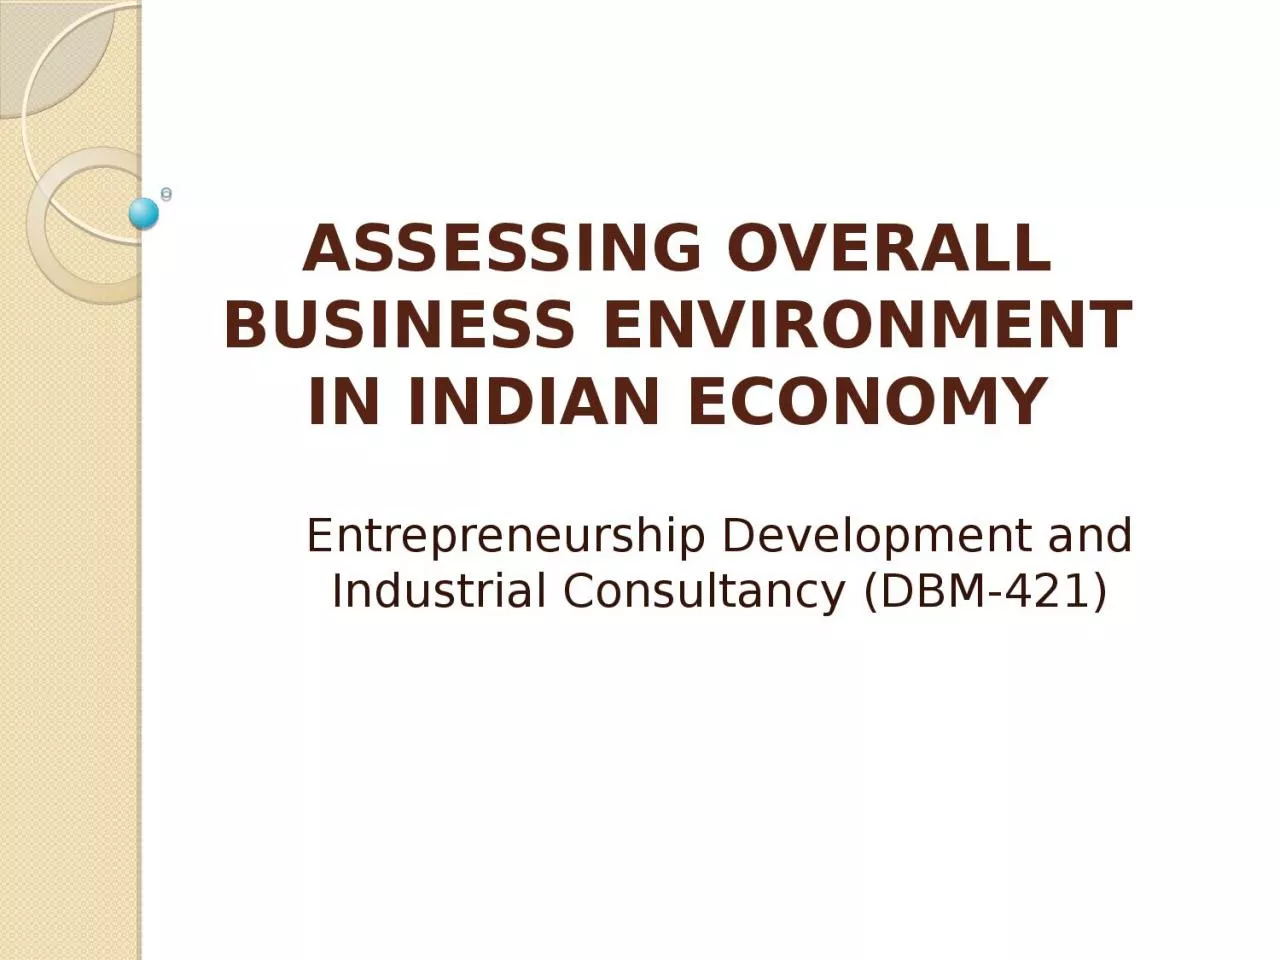 ASSESSING OVERALL BUSINESS ENVIRONMENT IN INDIAN ECONOMY